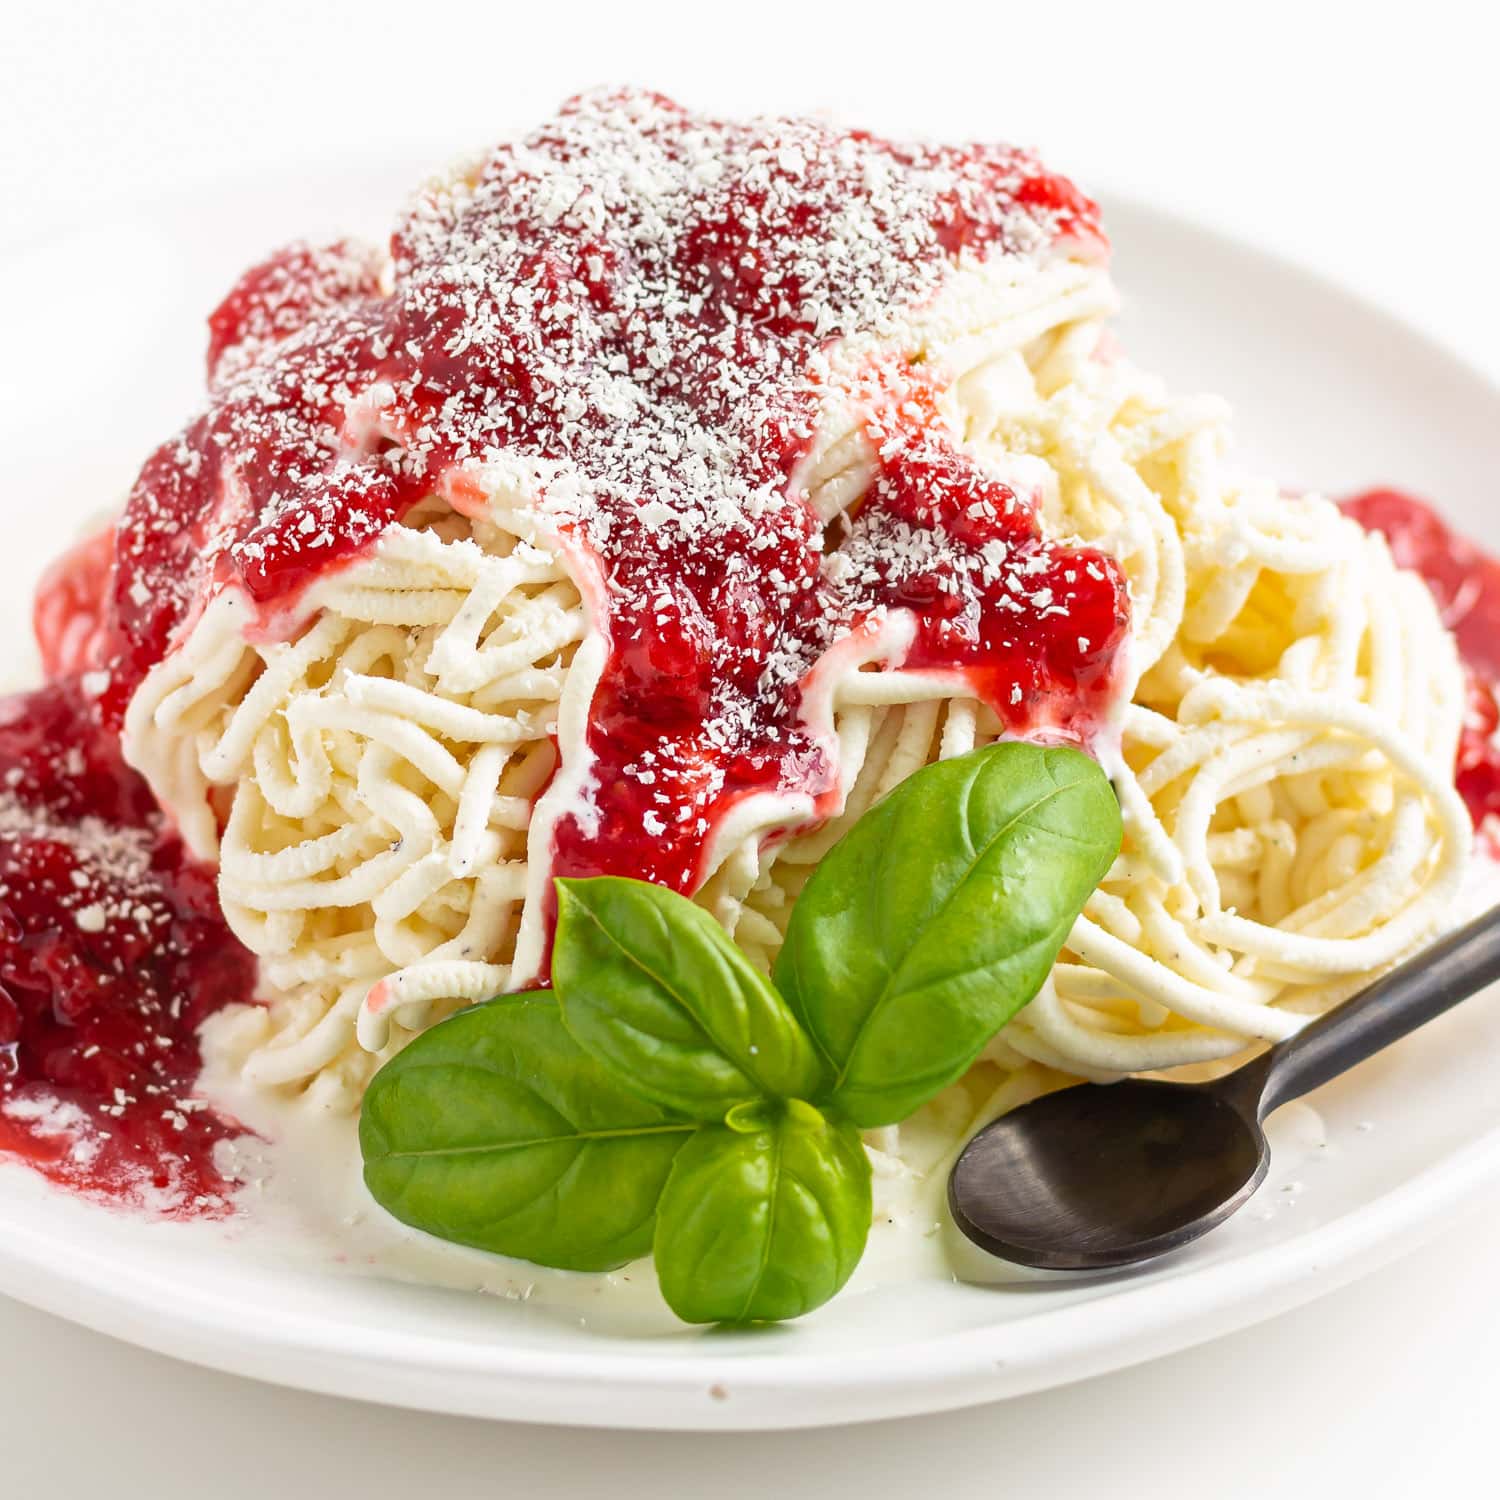 Spaghetti-Eis on a white plate with sprig of basil and black spoon.